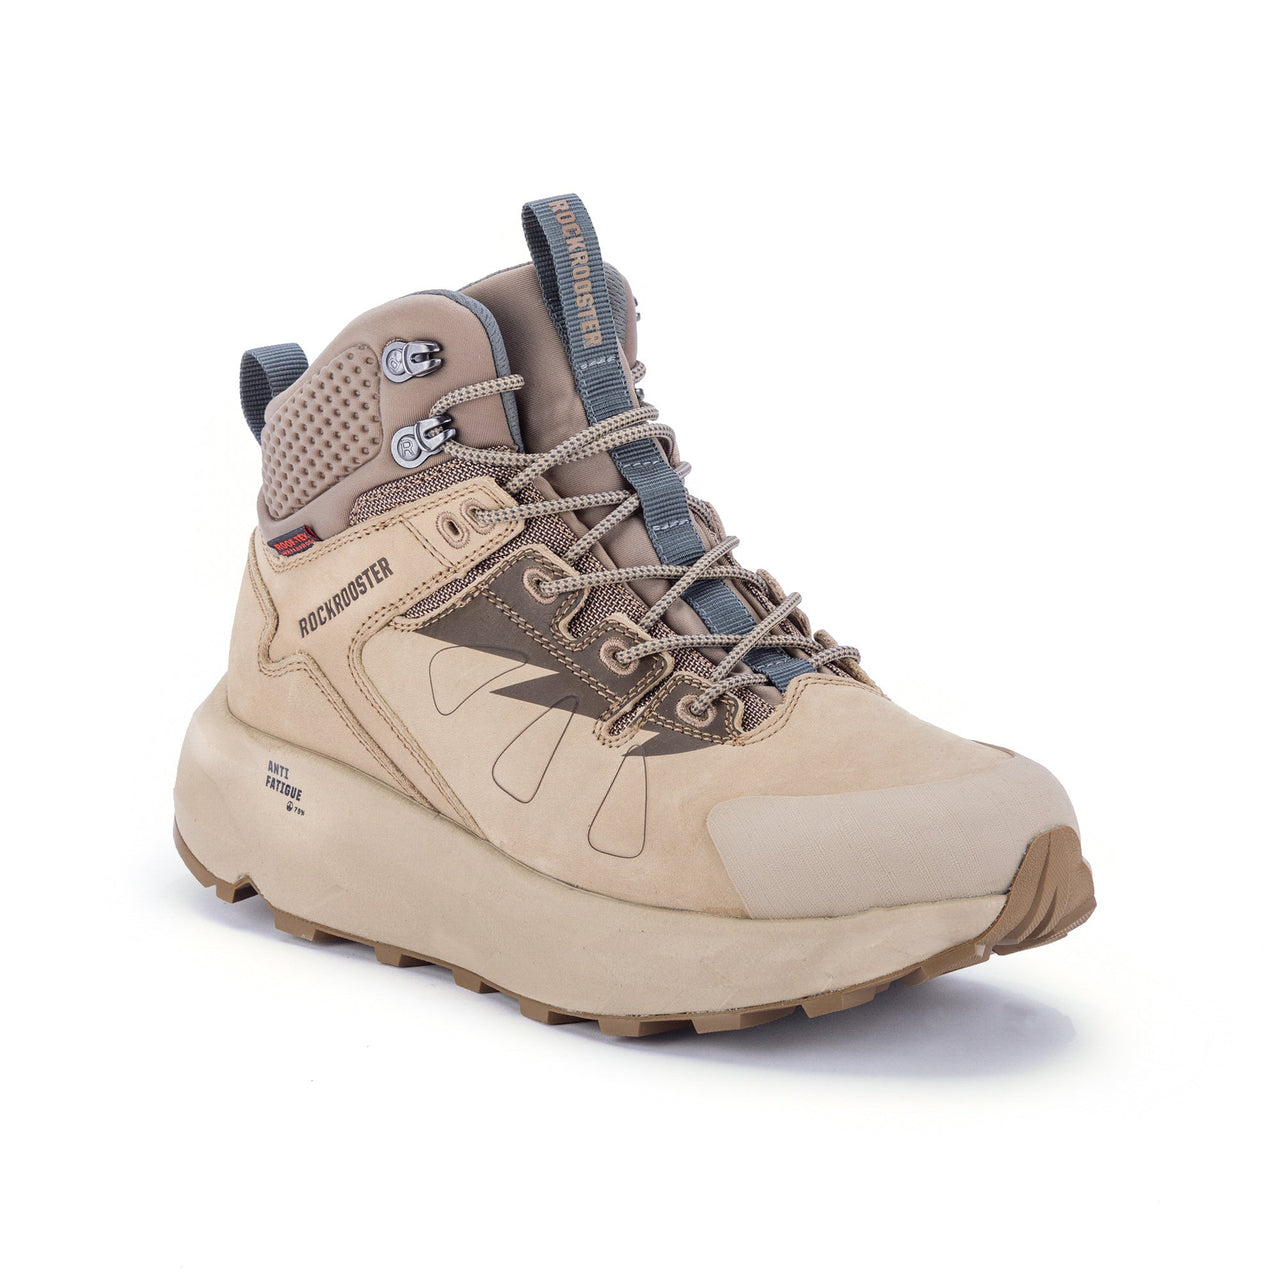 ROCKROOSTER Farmington Sand 6 Inch Waterproof Hiking Boots with - Mercantile Mountain